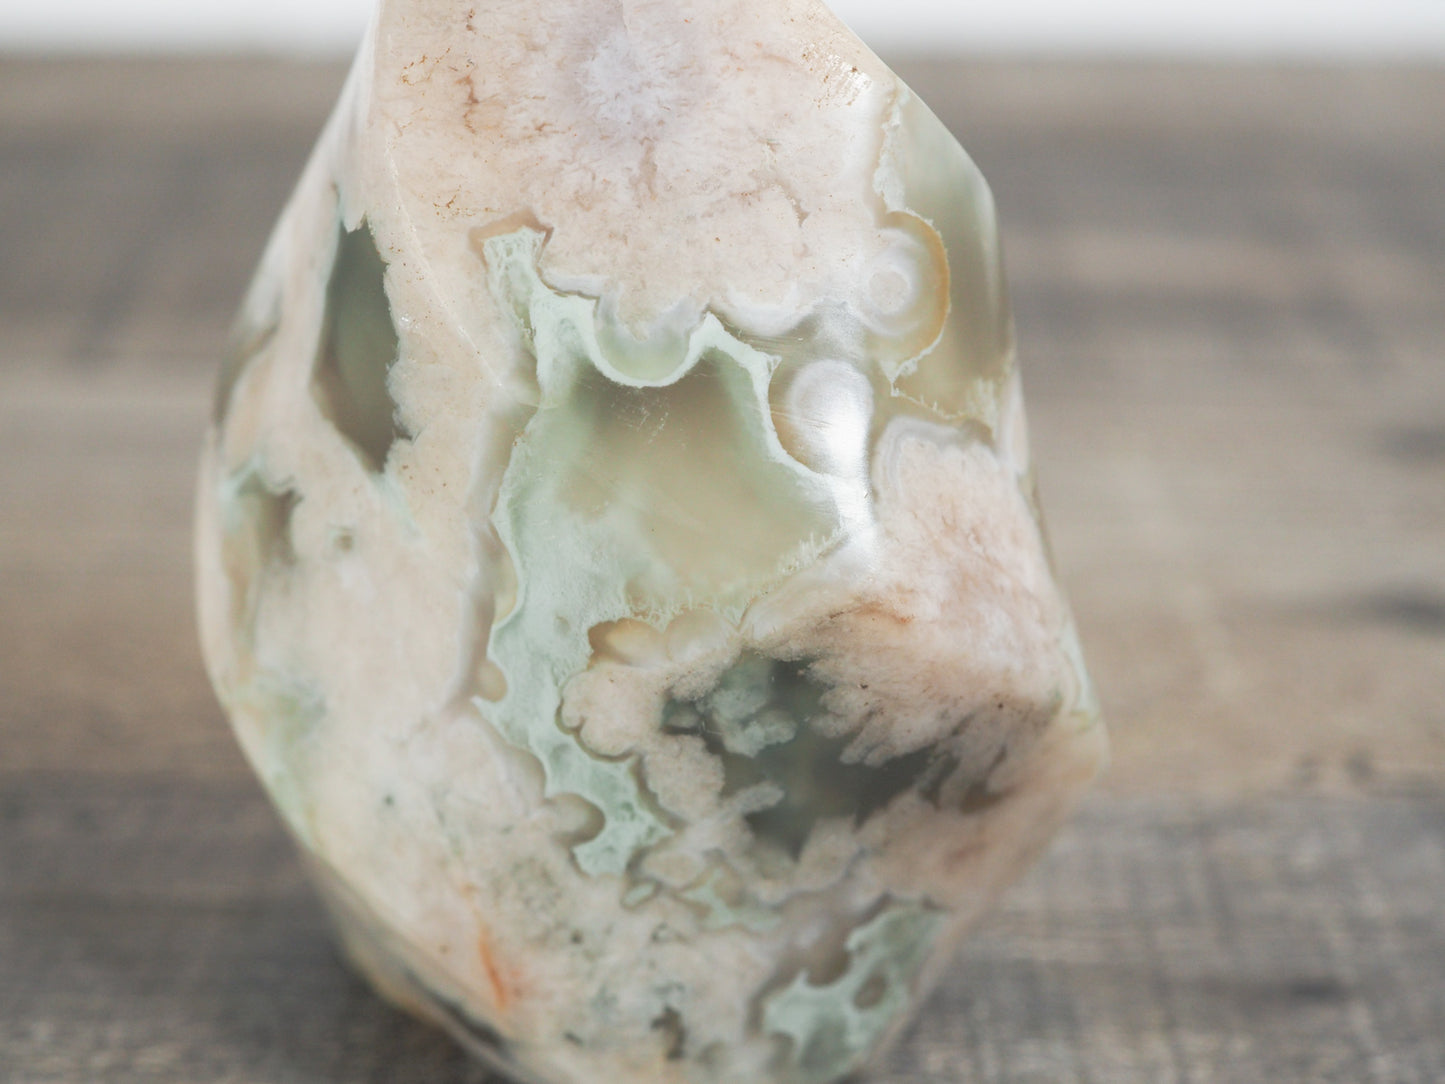 This sculpted flower agate flame with green inclusions is about 3" tall and 2" wide at its base. - Closeup